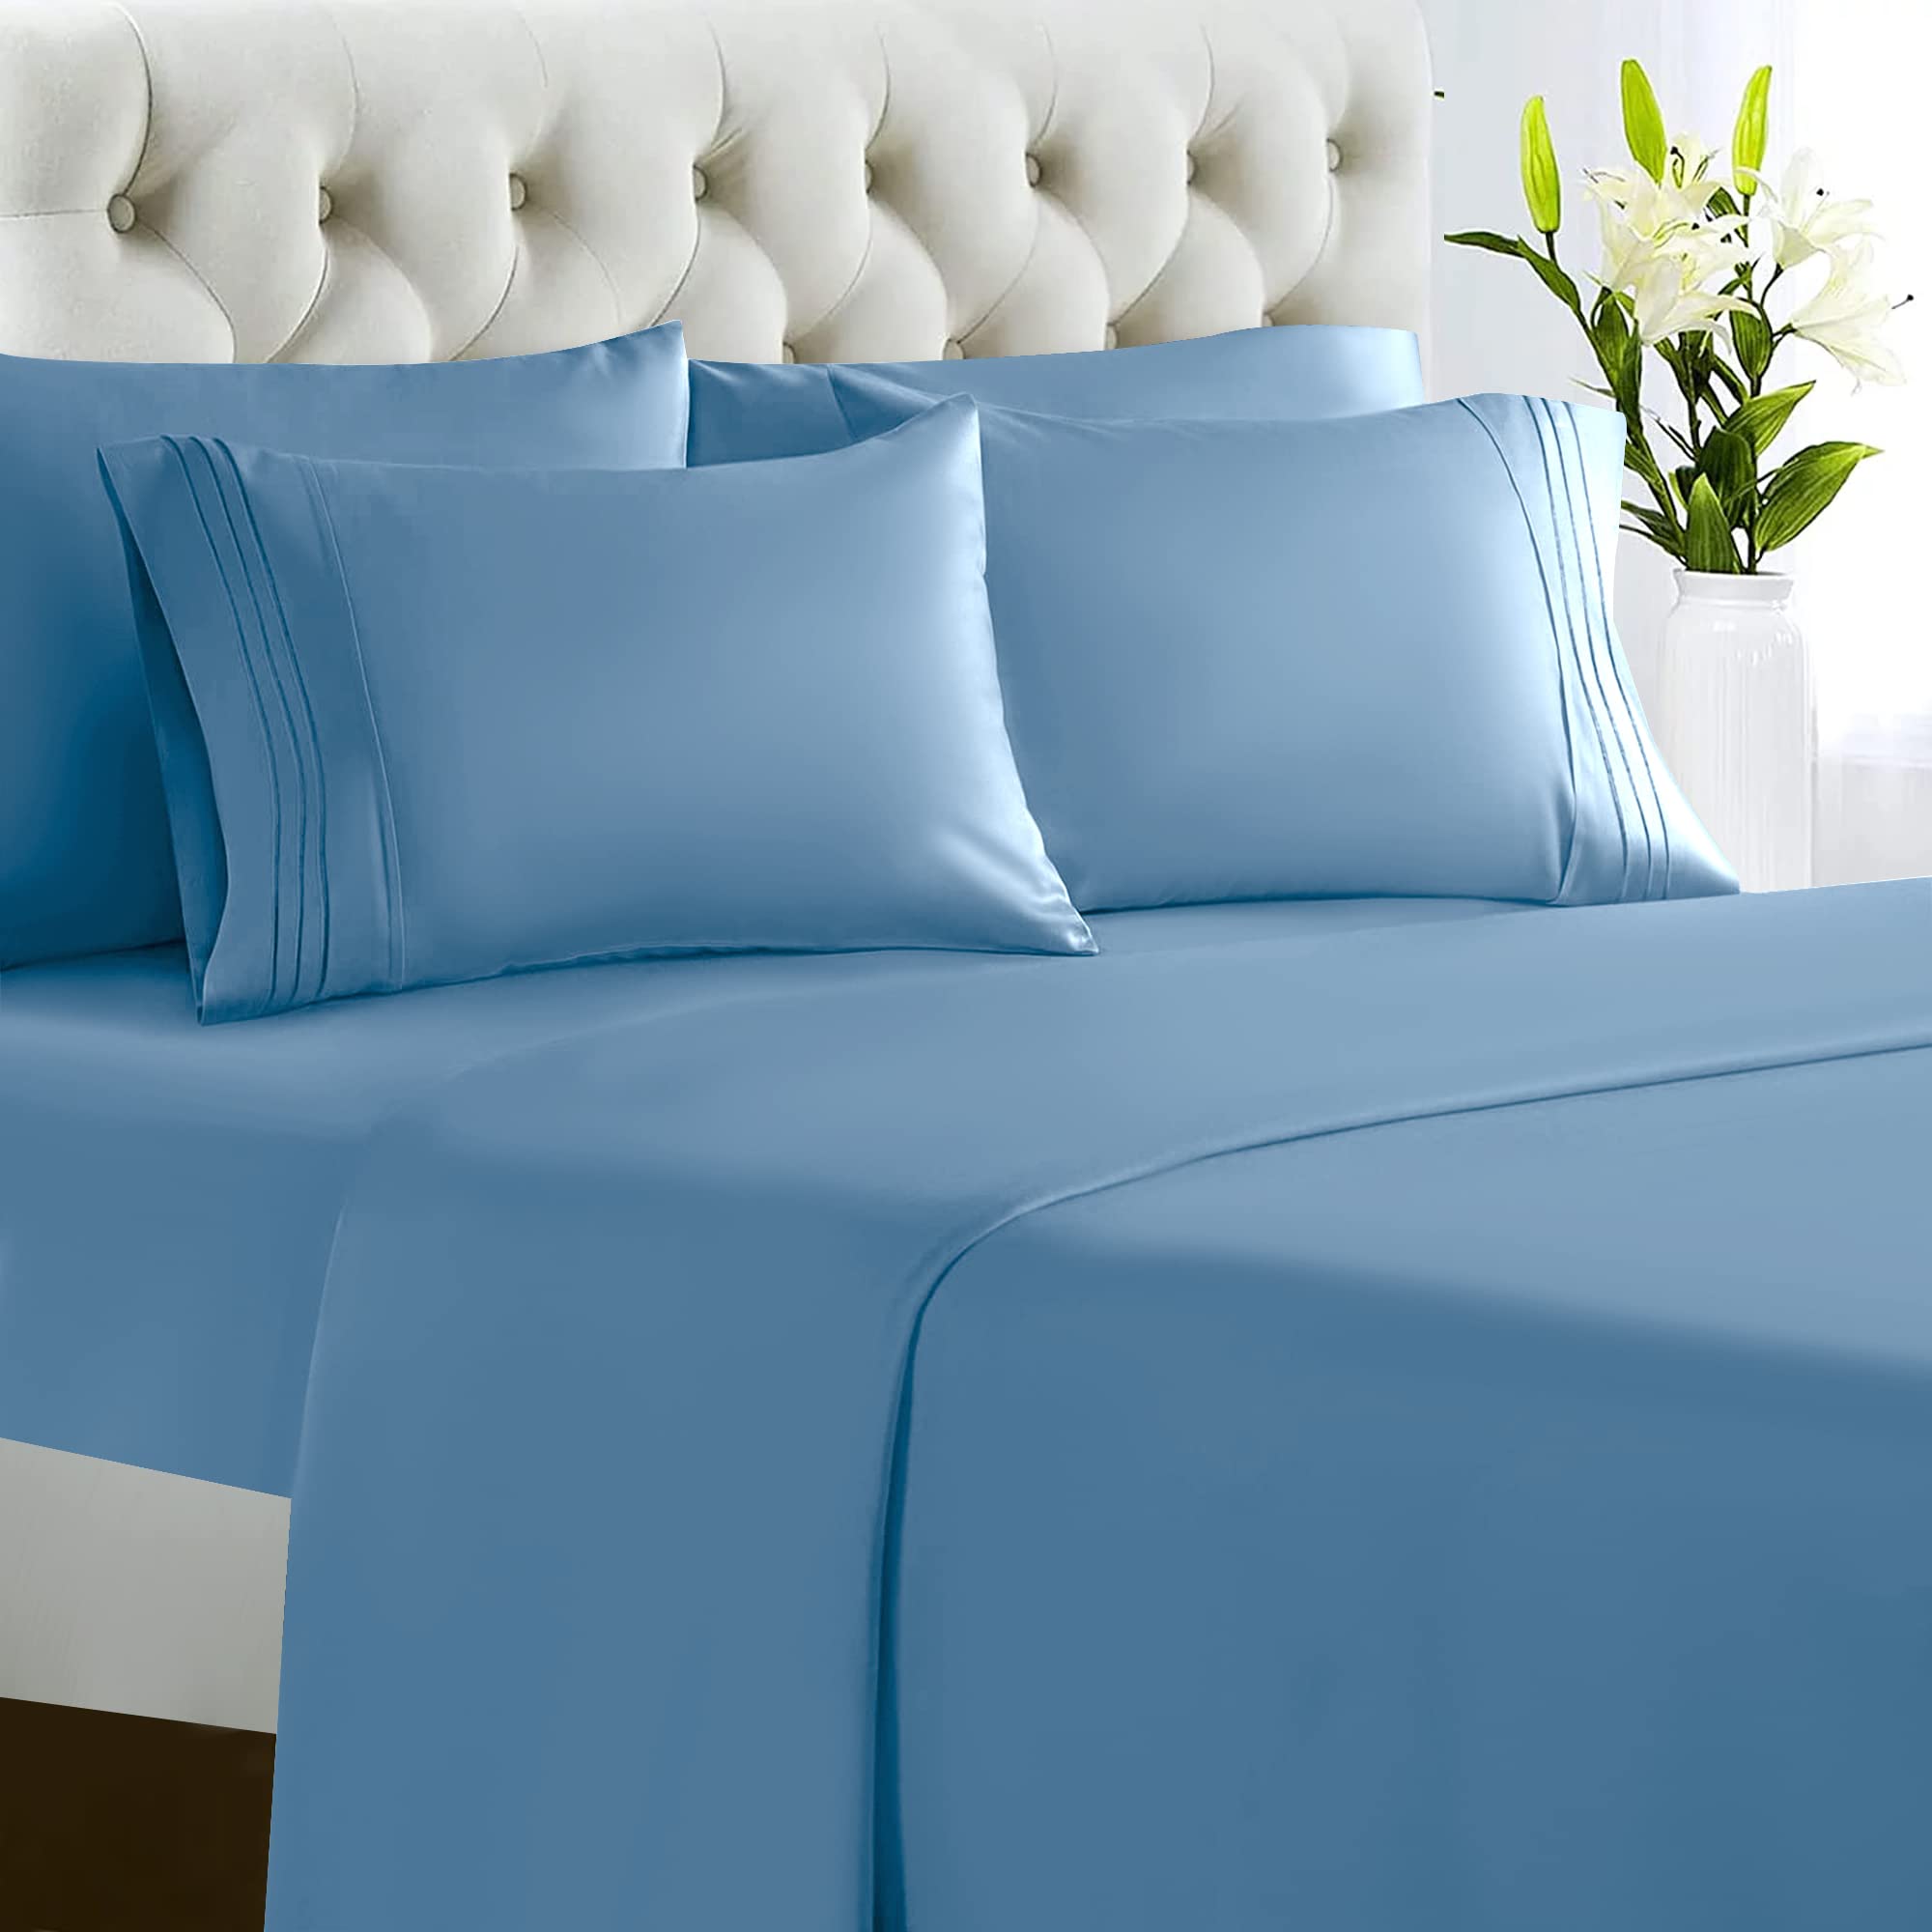 Book Cover Lux Decor Collection Bed Sheets - 6 Pc Sheets for Queen Size Bed - 1800 Thread Count Brushed Microfiber Sheets - 16 Inches Deep Pocket Bedding Sheets & Pillowcases|Lightweight Sheets| Queen Sheets Embroidery Blue Queen